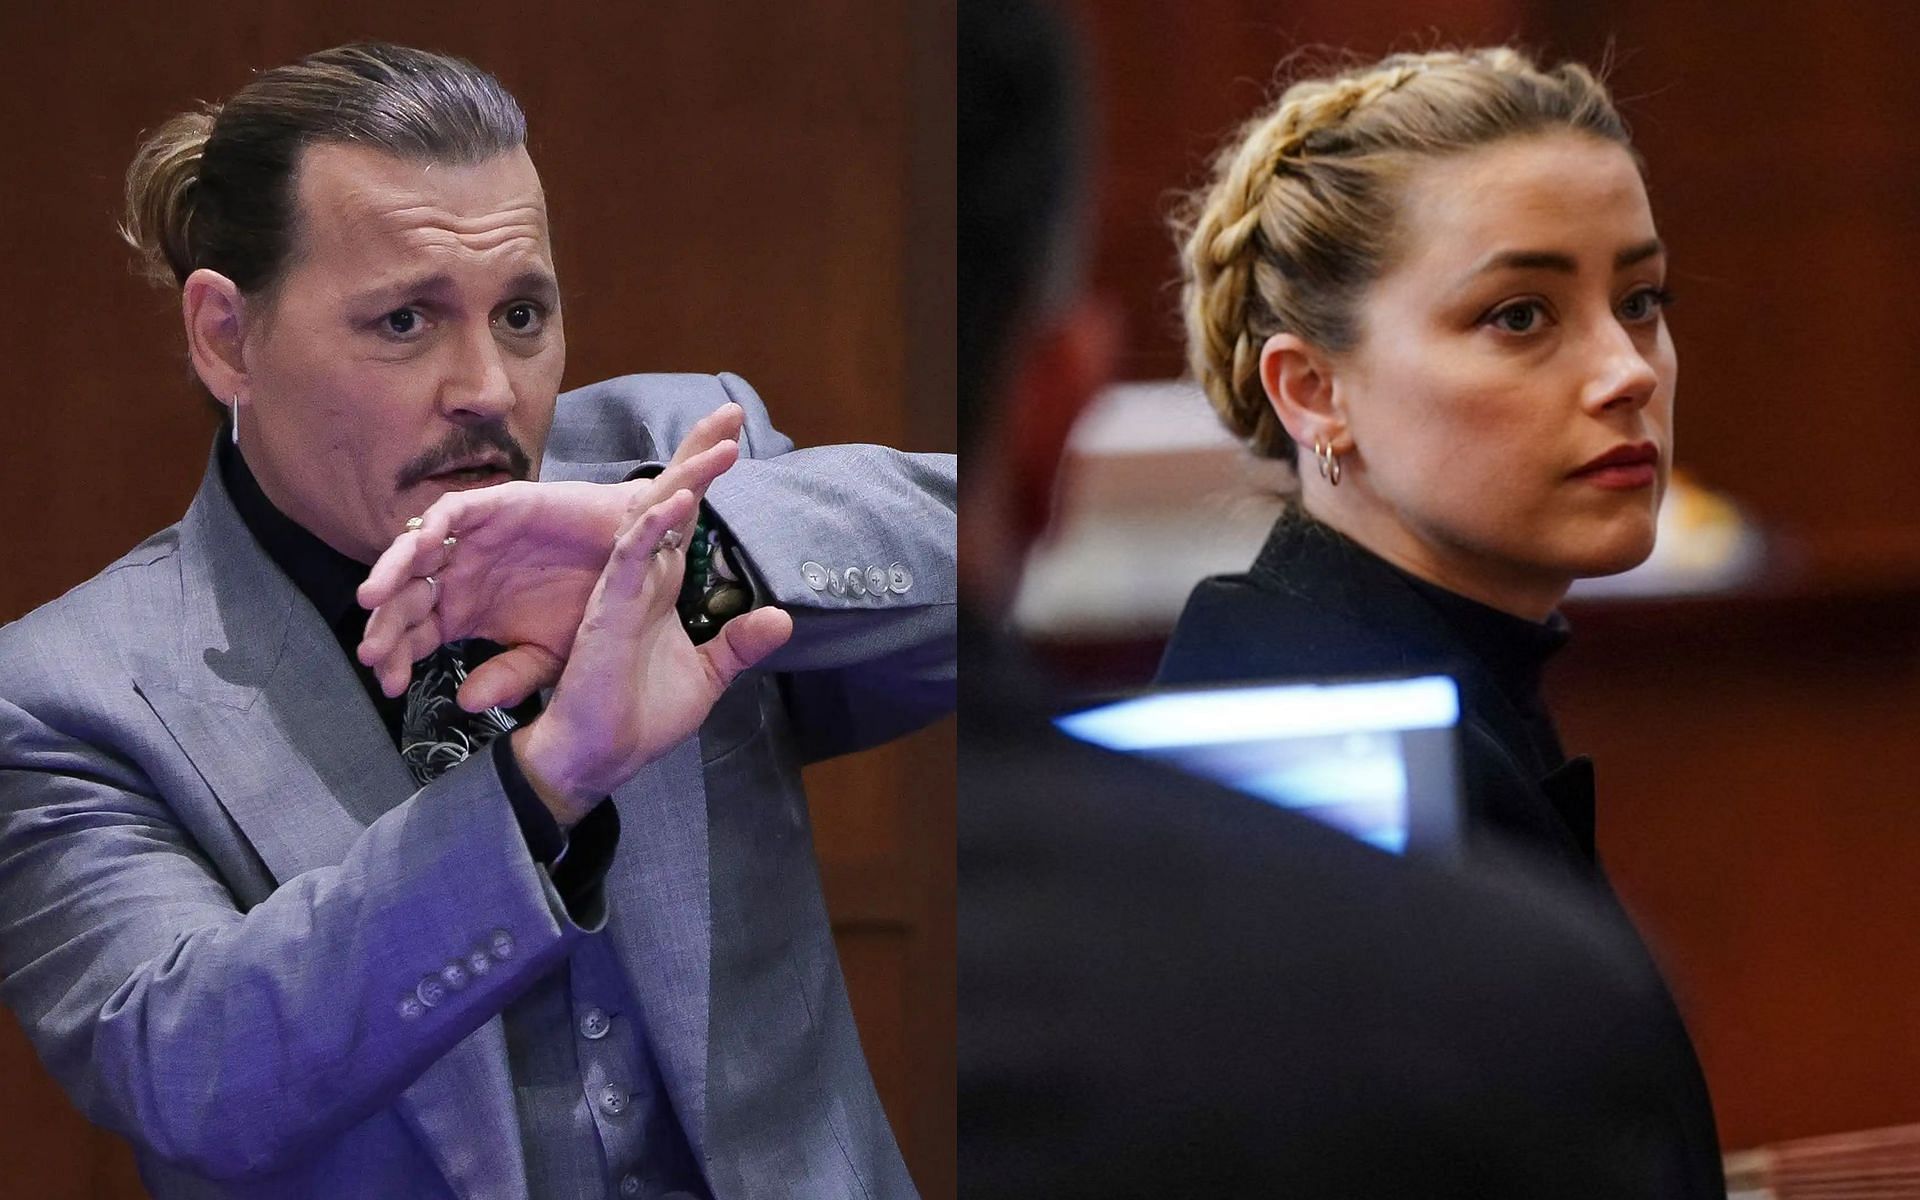 Johnny Depp and Amber Heard (Images via Getty Images)